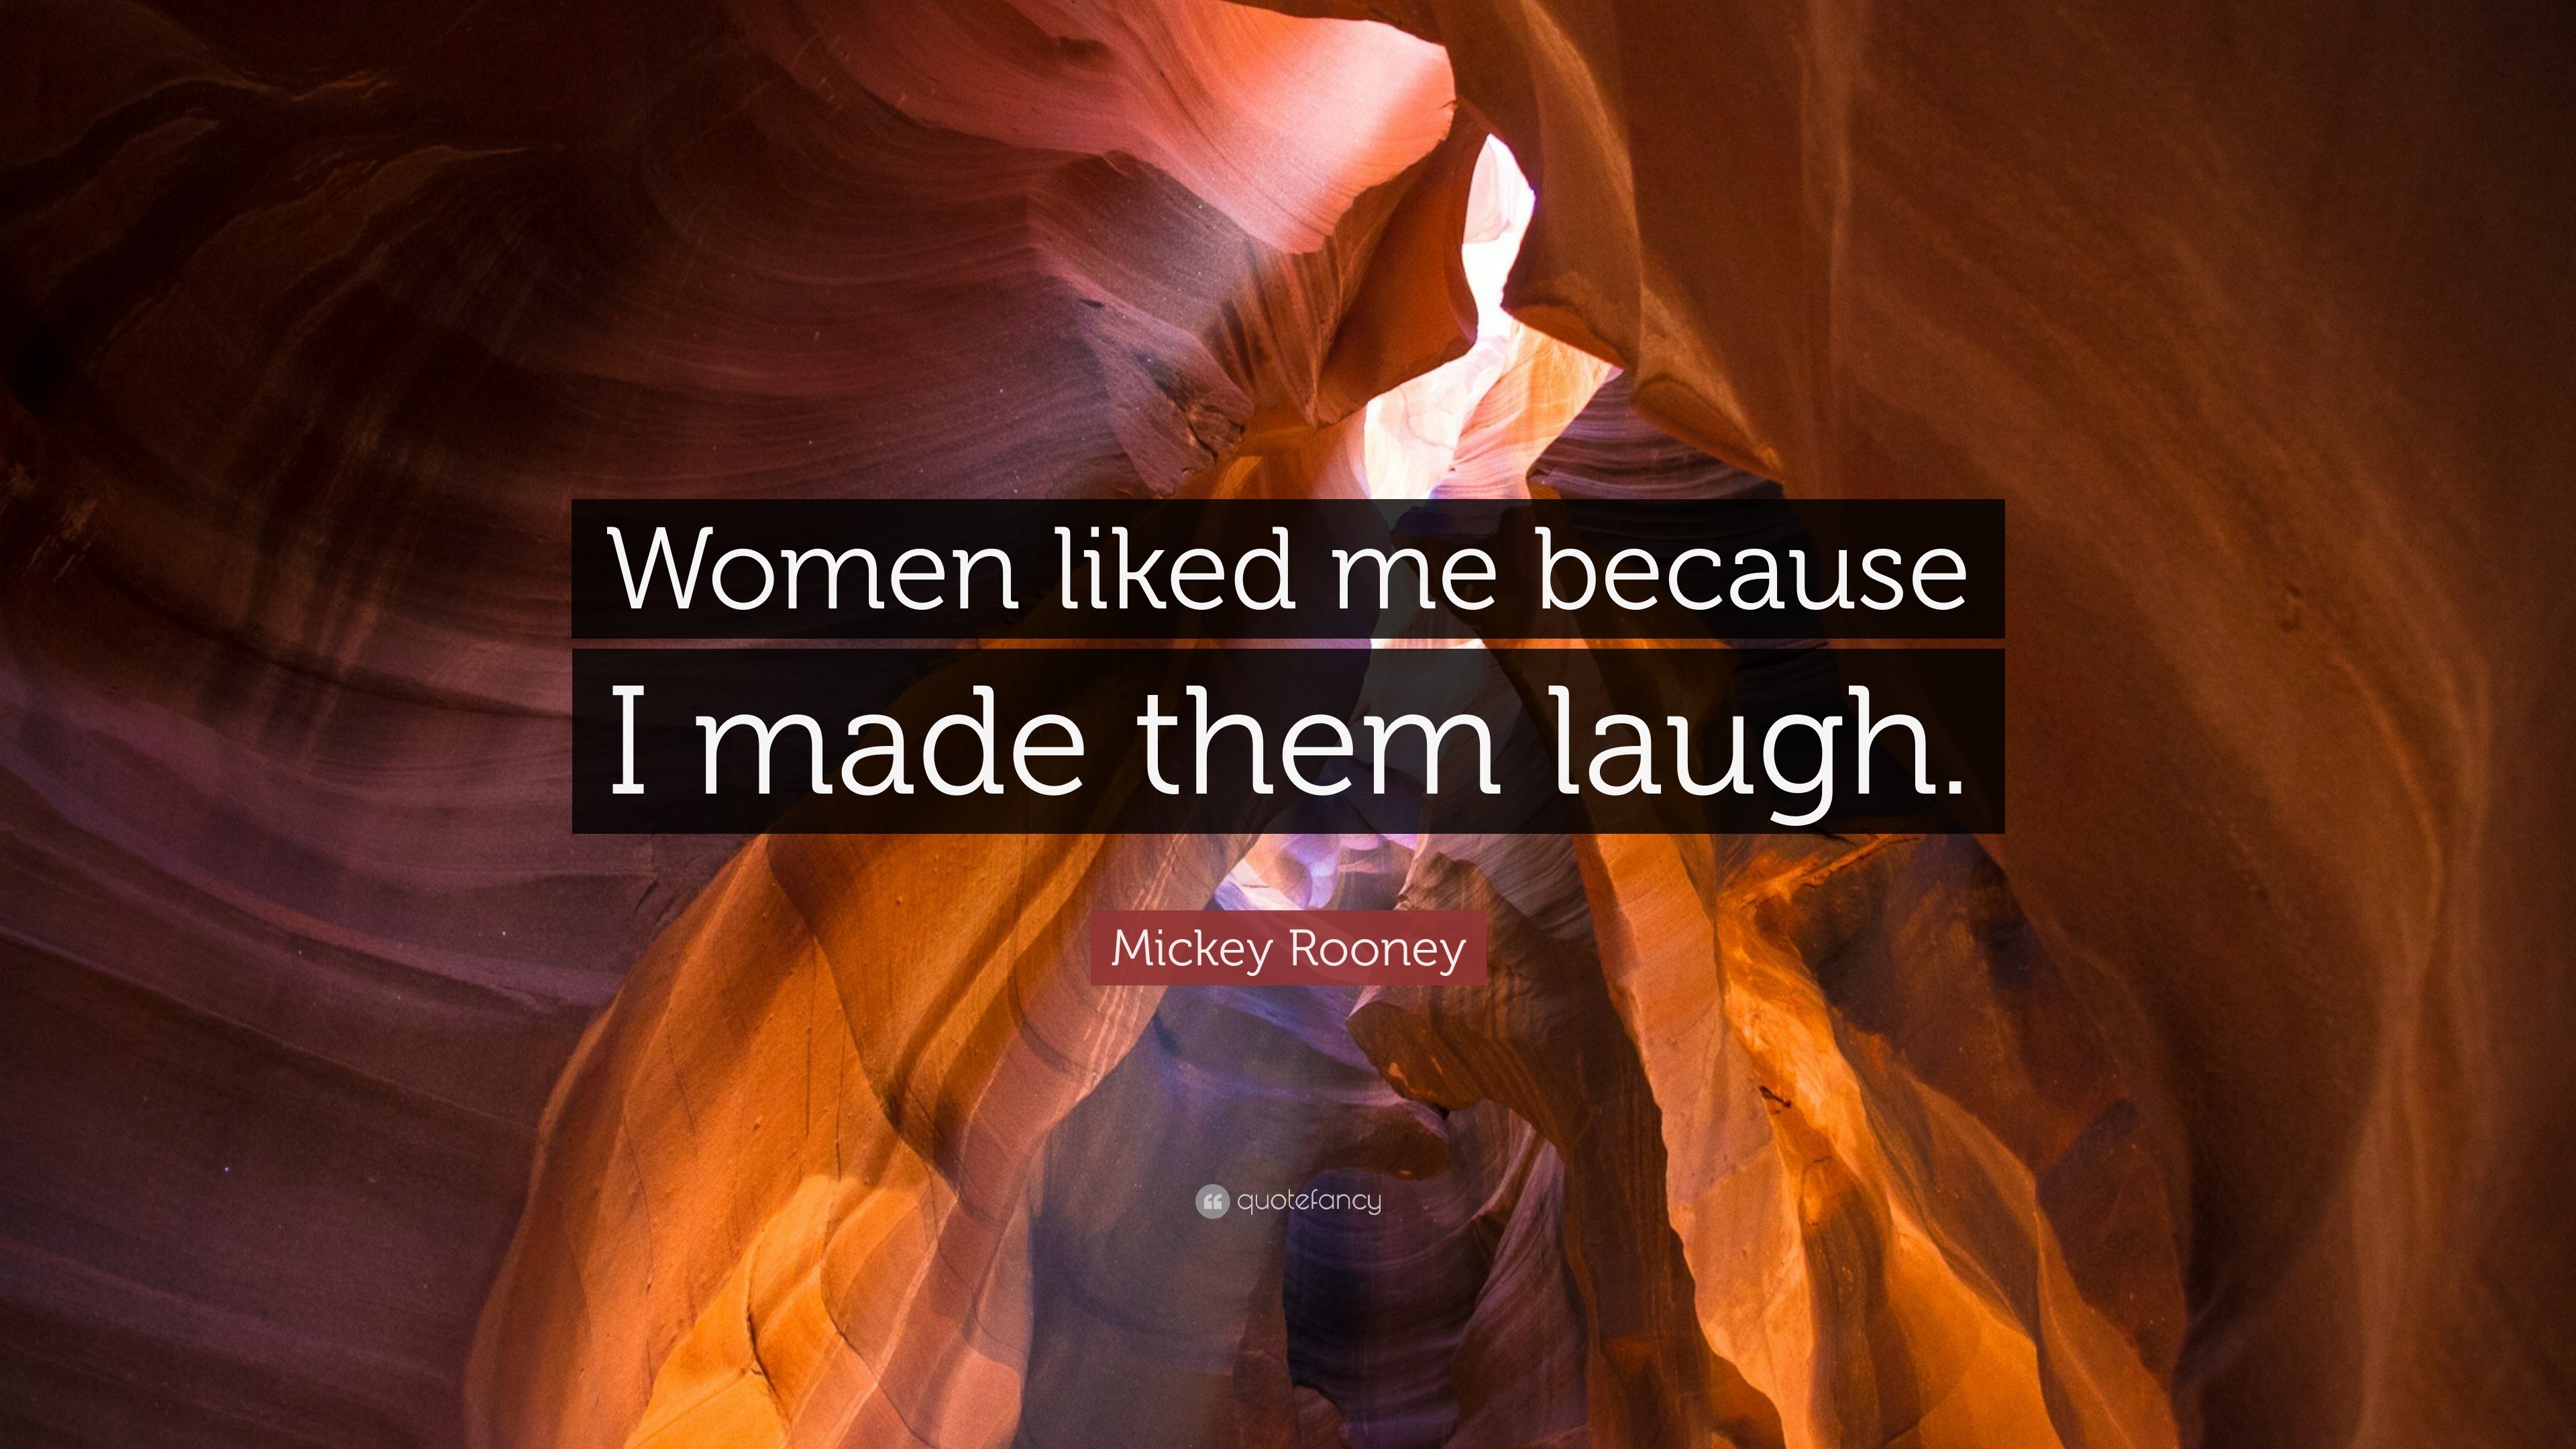 Mickey Rooney Quote: "Women liked me because I made them ...